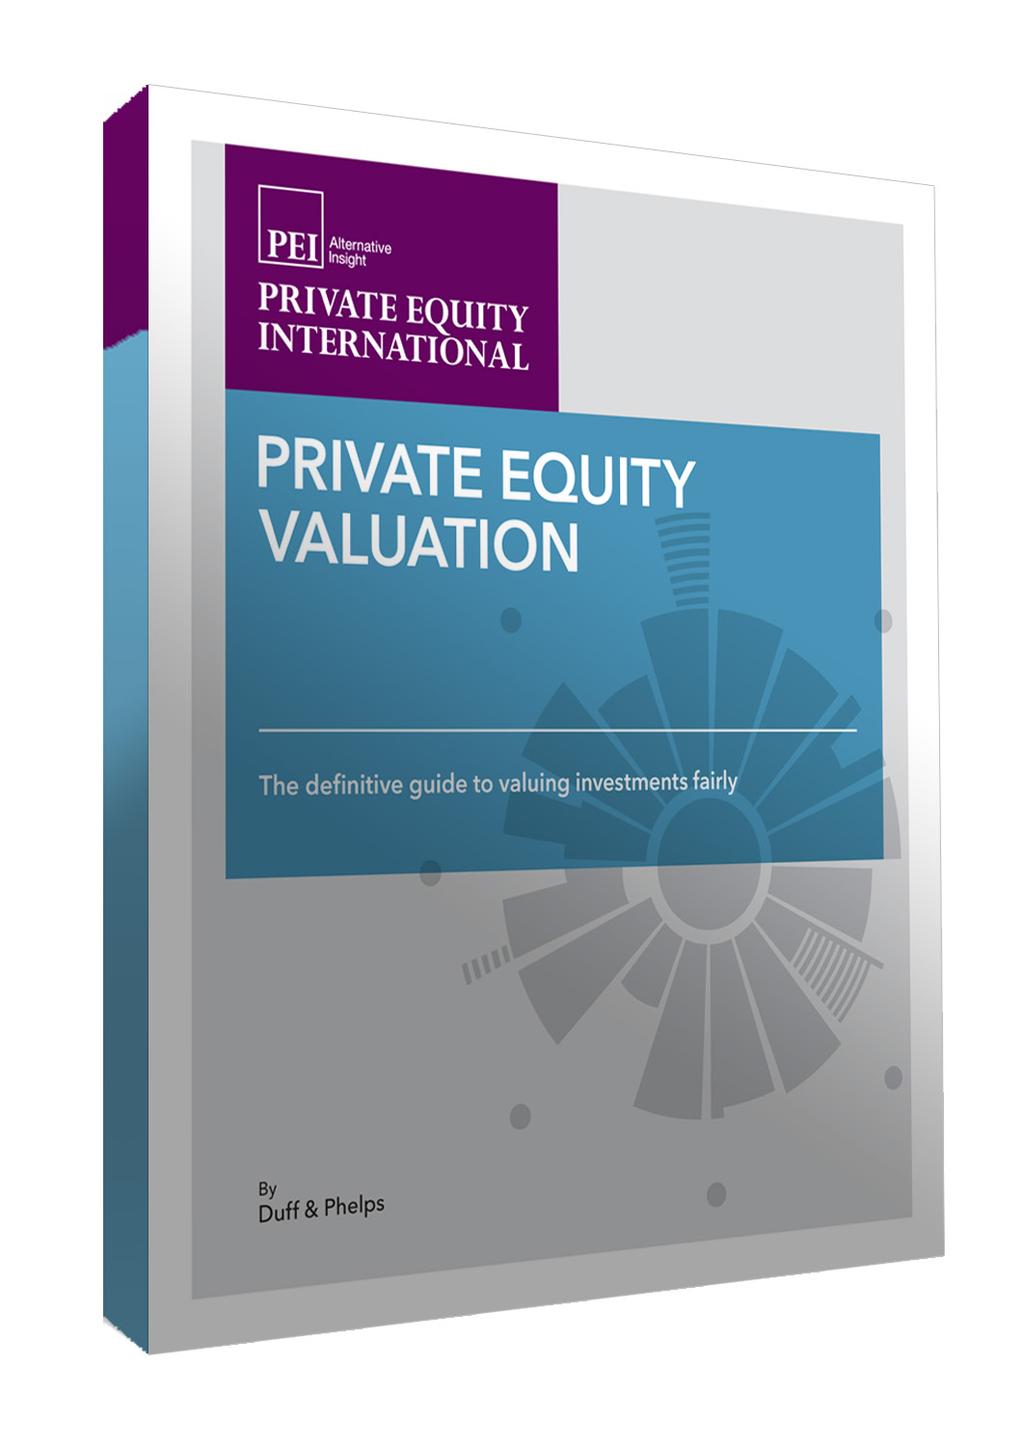 The new guide provides fund managers and investors with essential tools and best practices for valuing their investments, including illustrative examples on valuation techniques and nuances for a